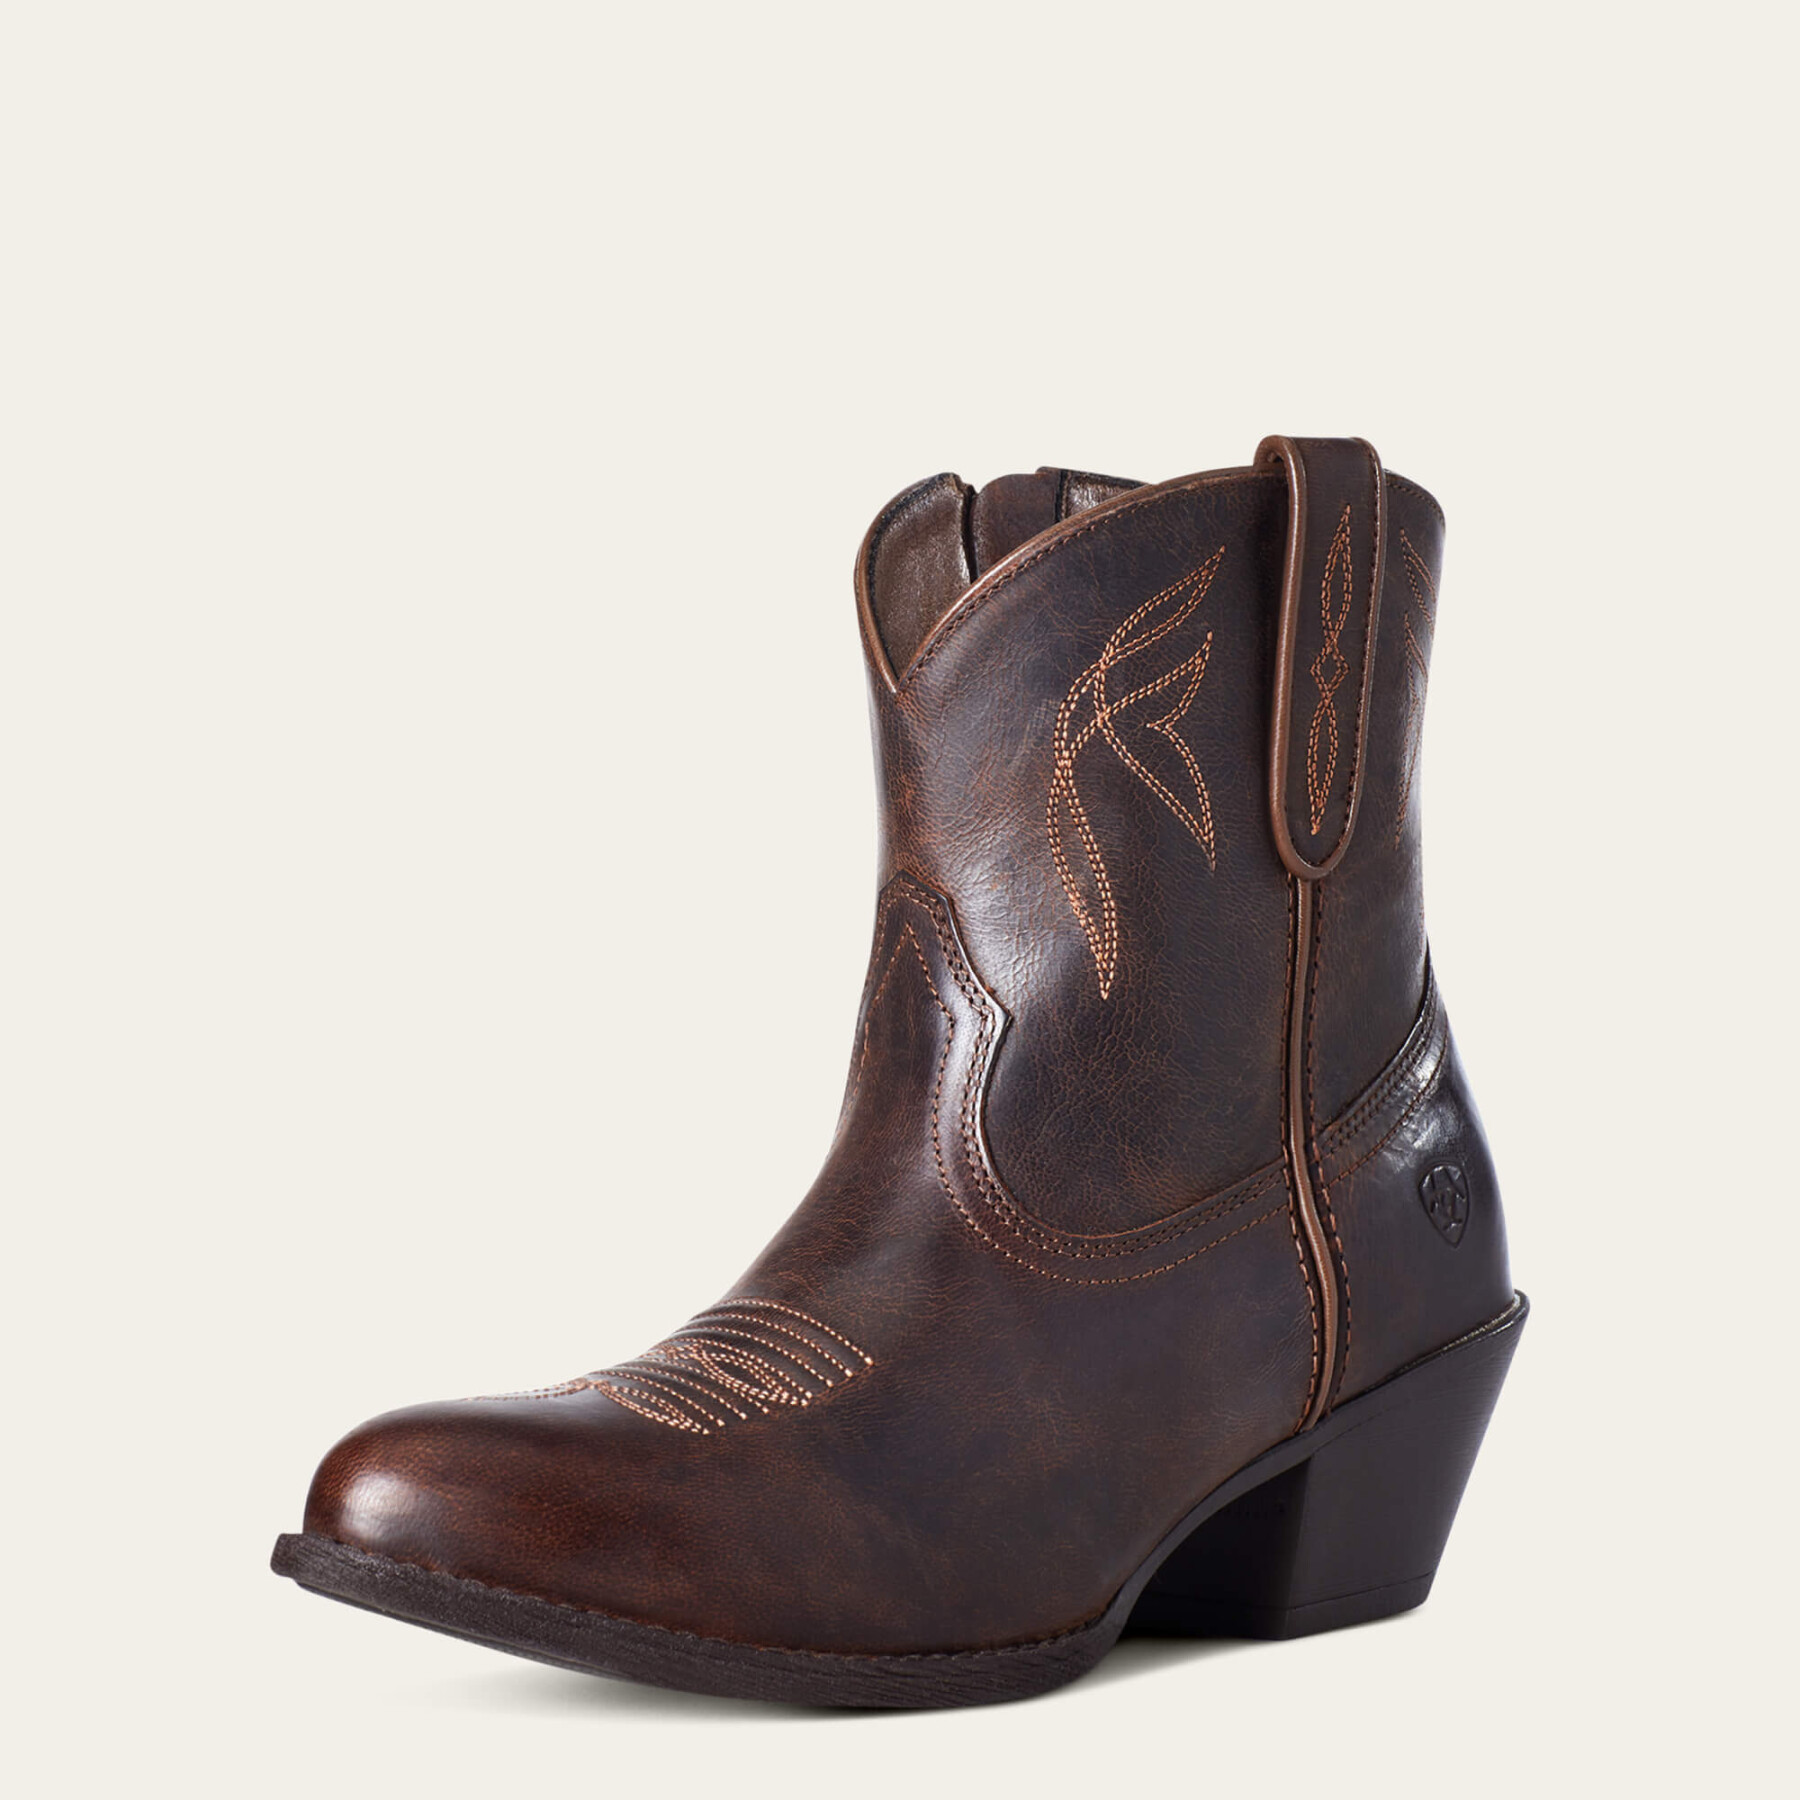 Women's leather western boots Ariat Darlin